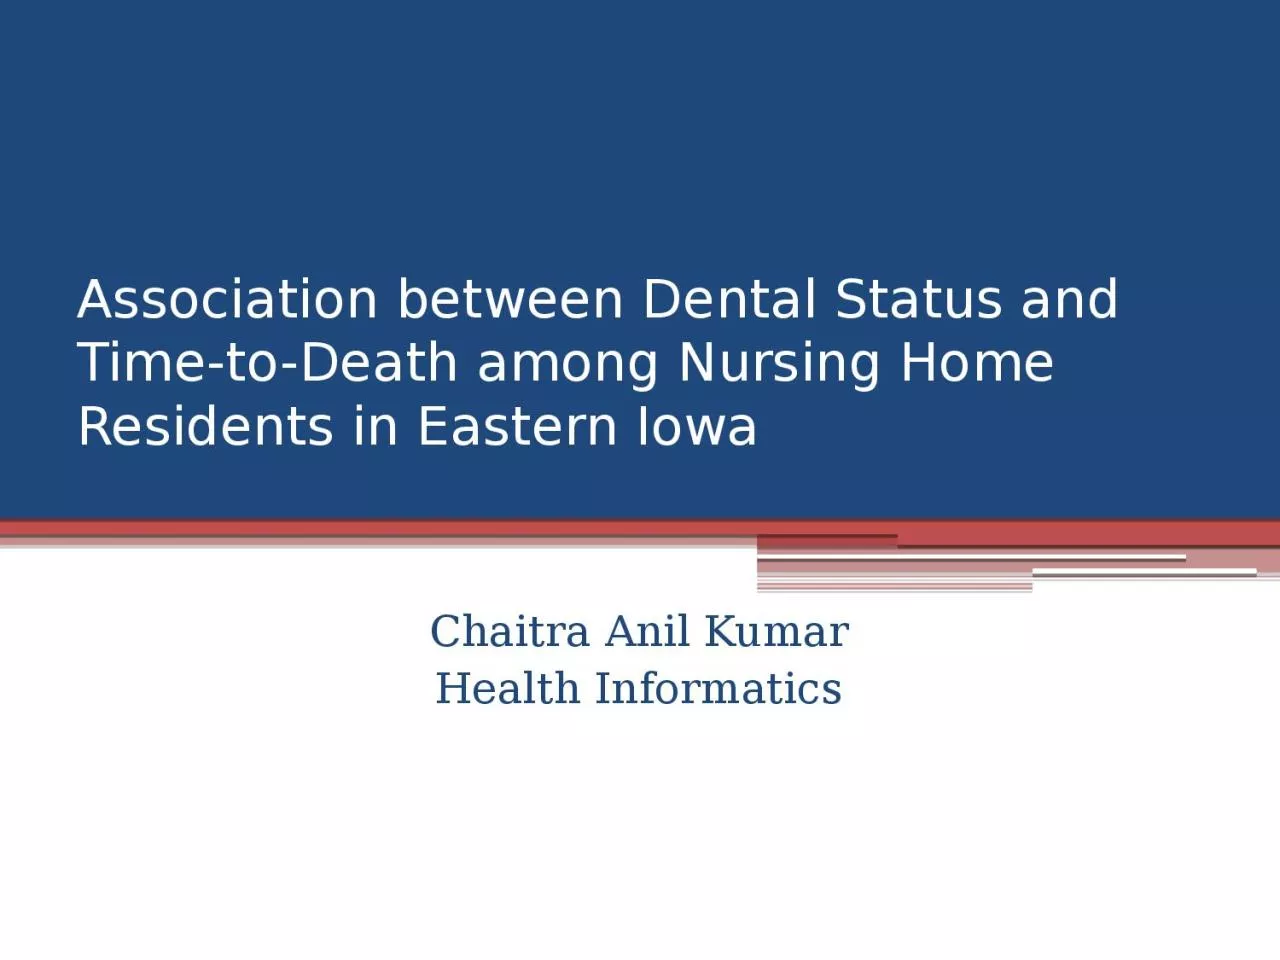 Association between Dental Status and Time-to-Death among Nursing Home Residents in Eastern